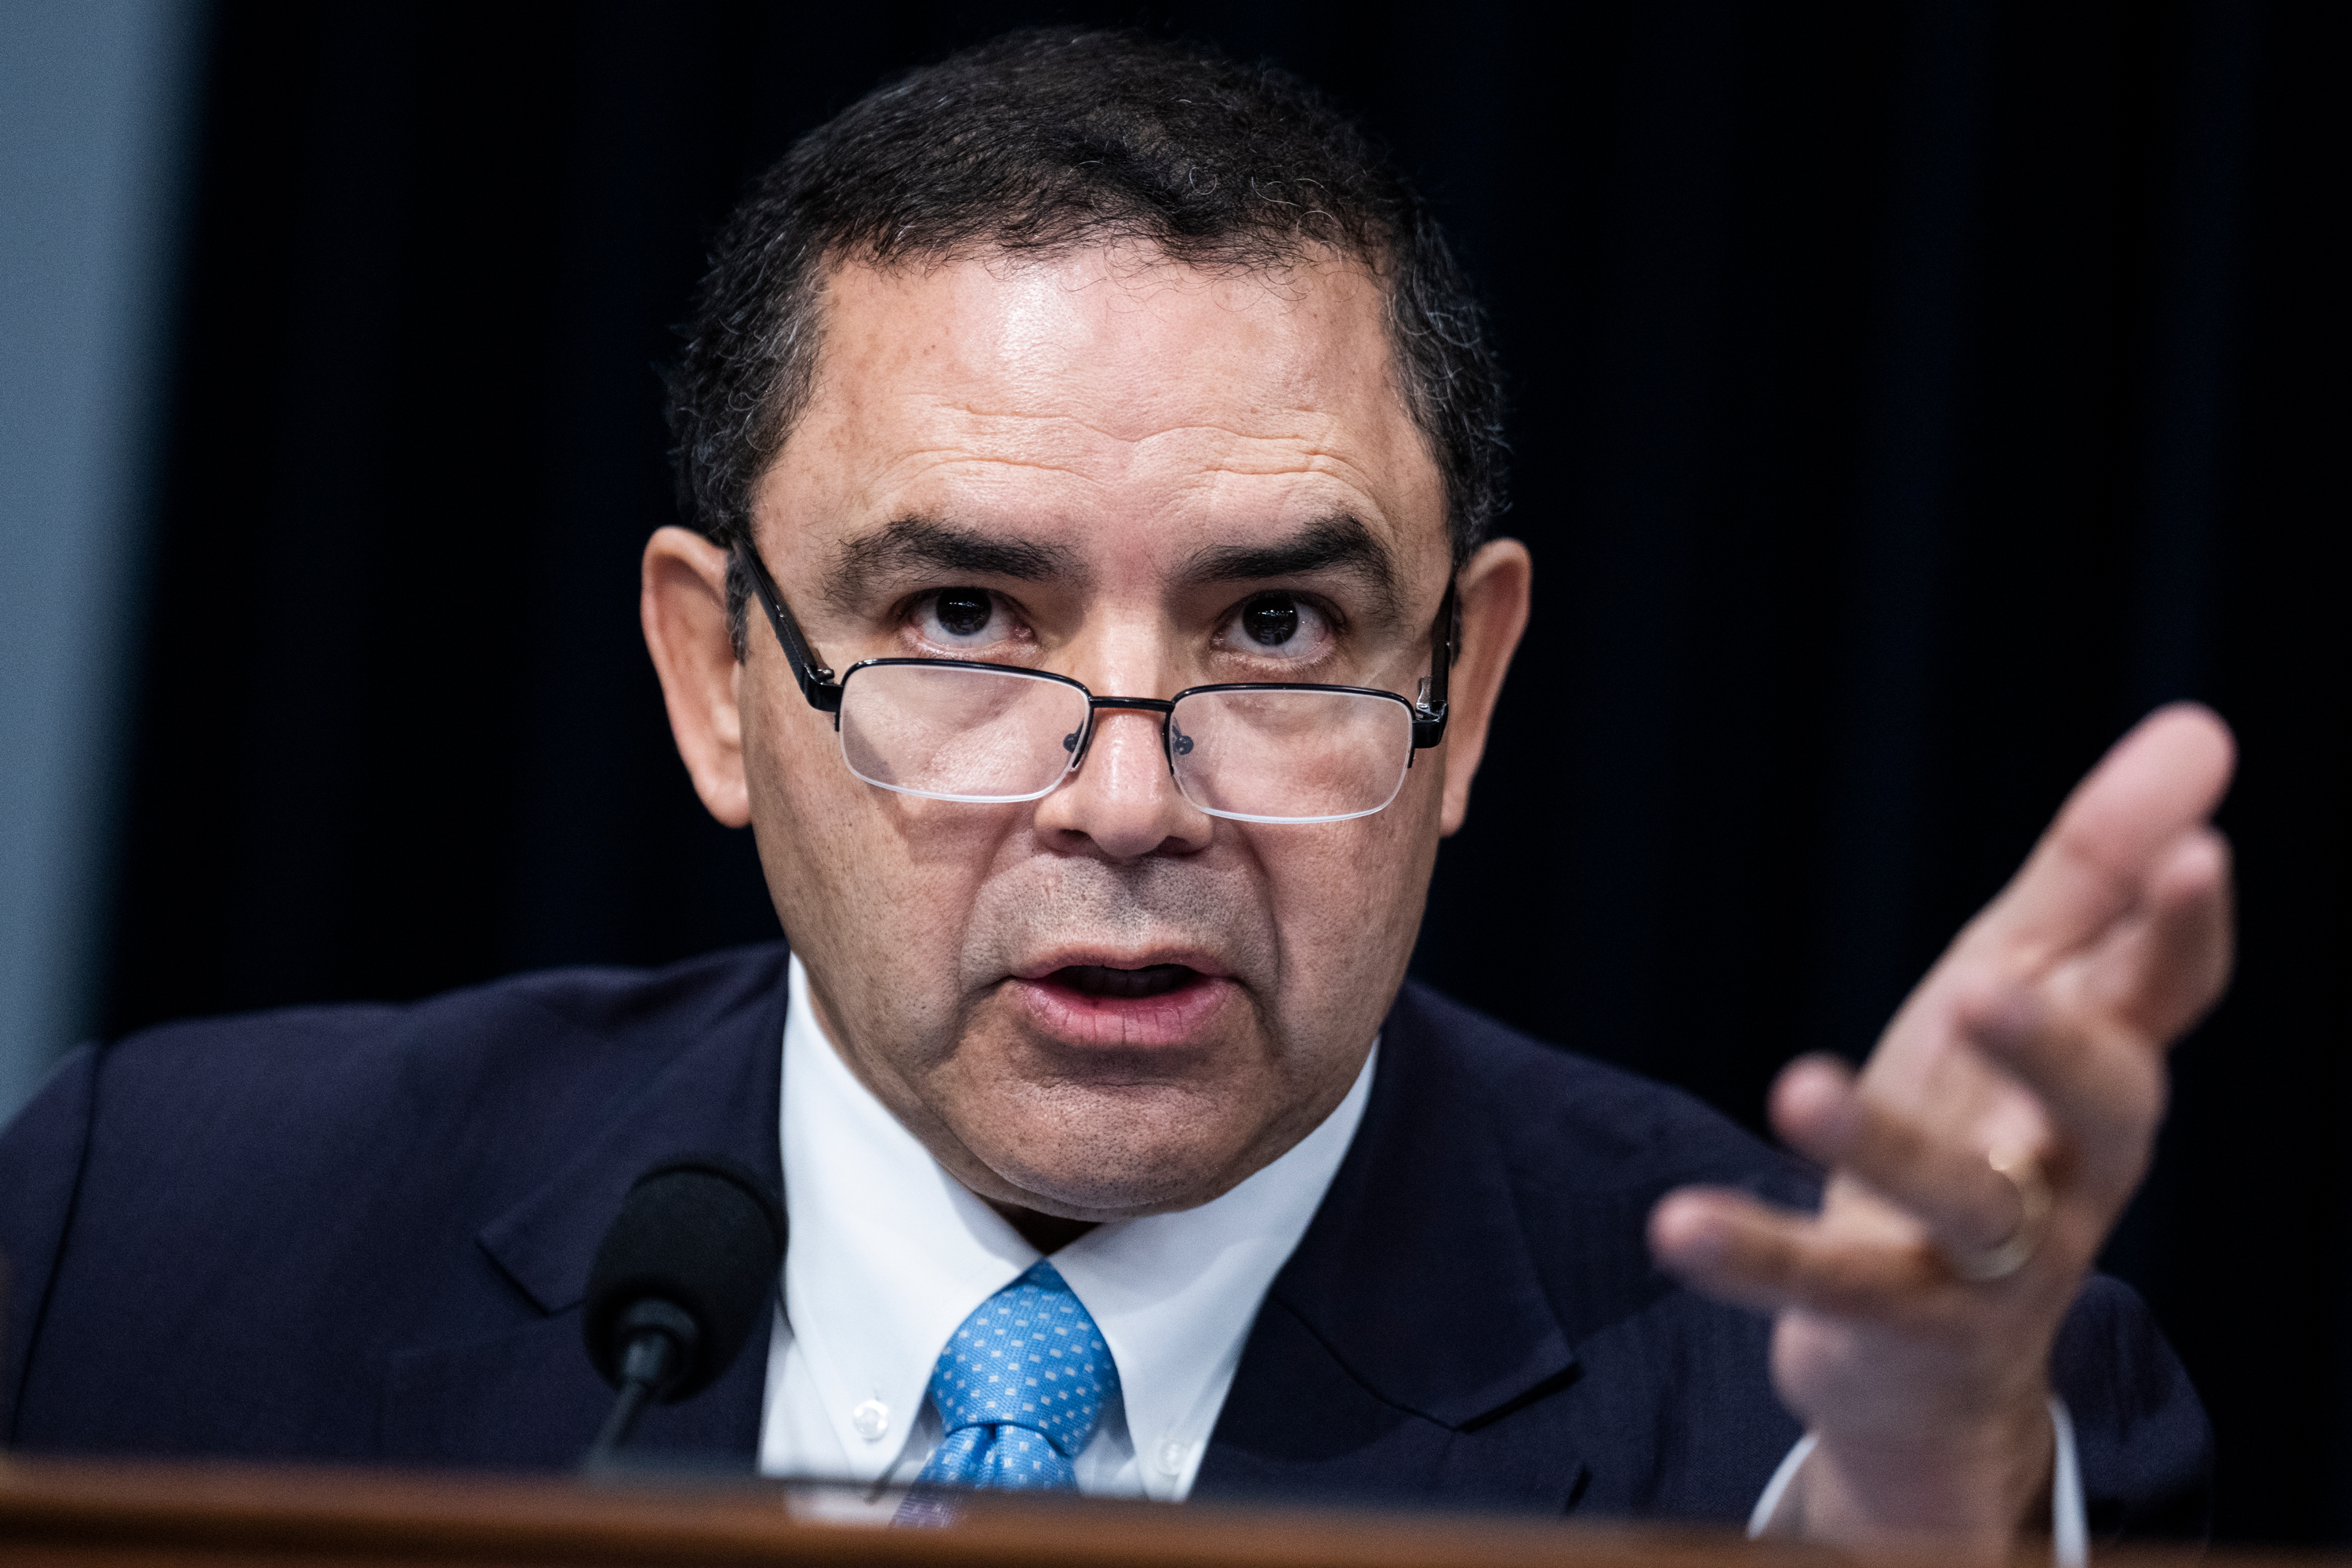 Rep. Henry Cuellar, during the House Appropriations Subcommittee on Defense hearing in the Rayburn Building, on March 23.